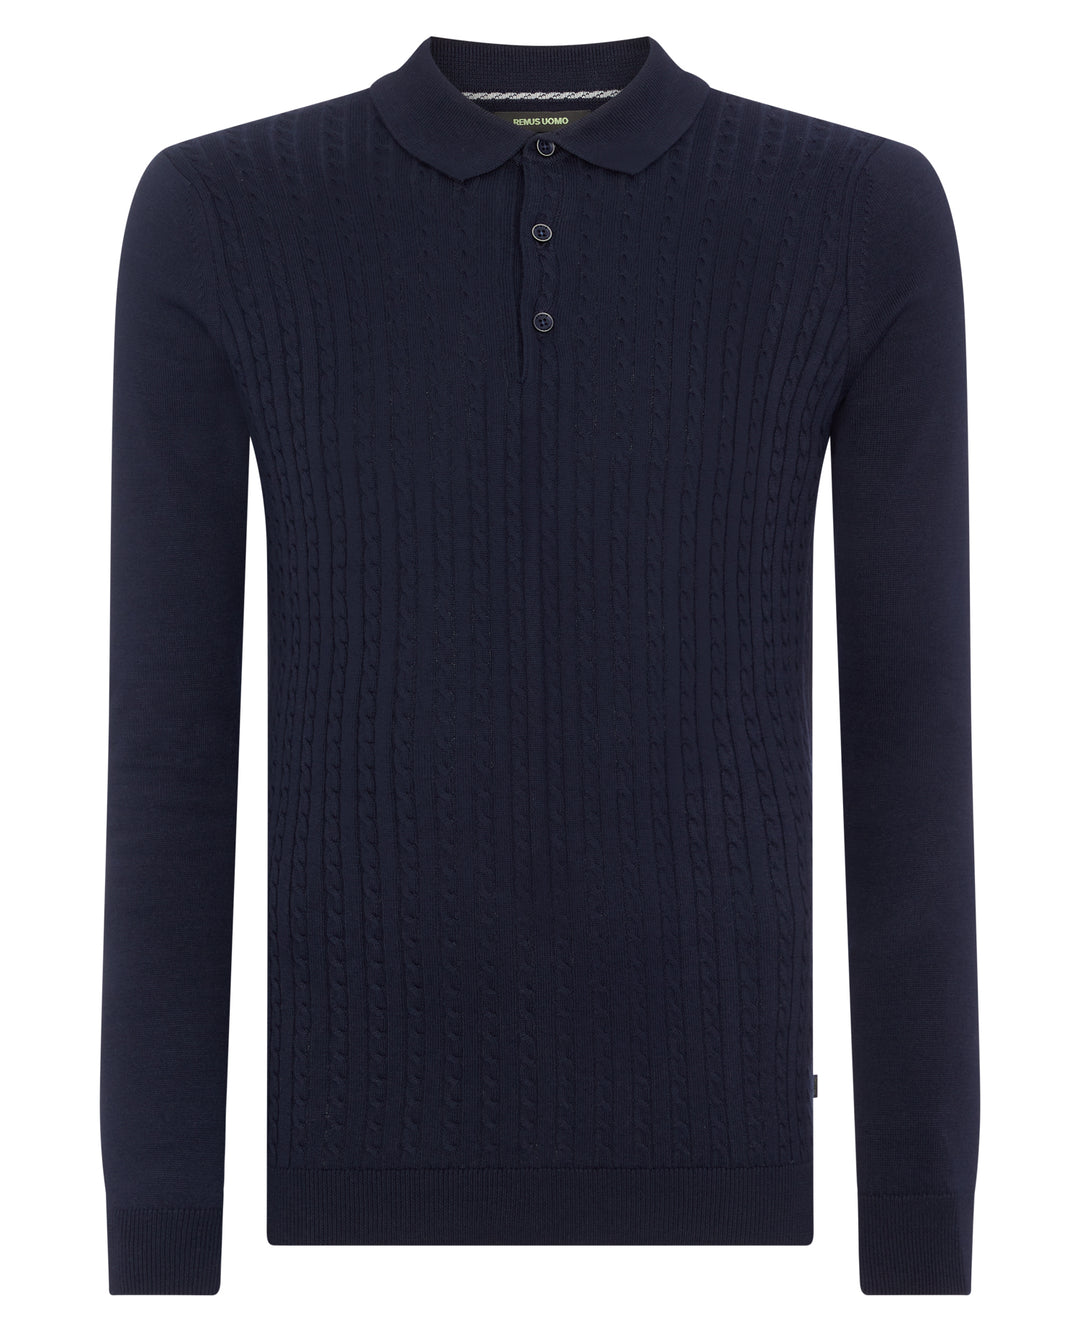 REMUS LS KNITTED POLO 58759 - NAVY